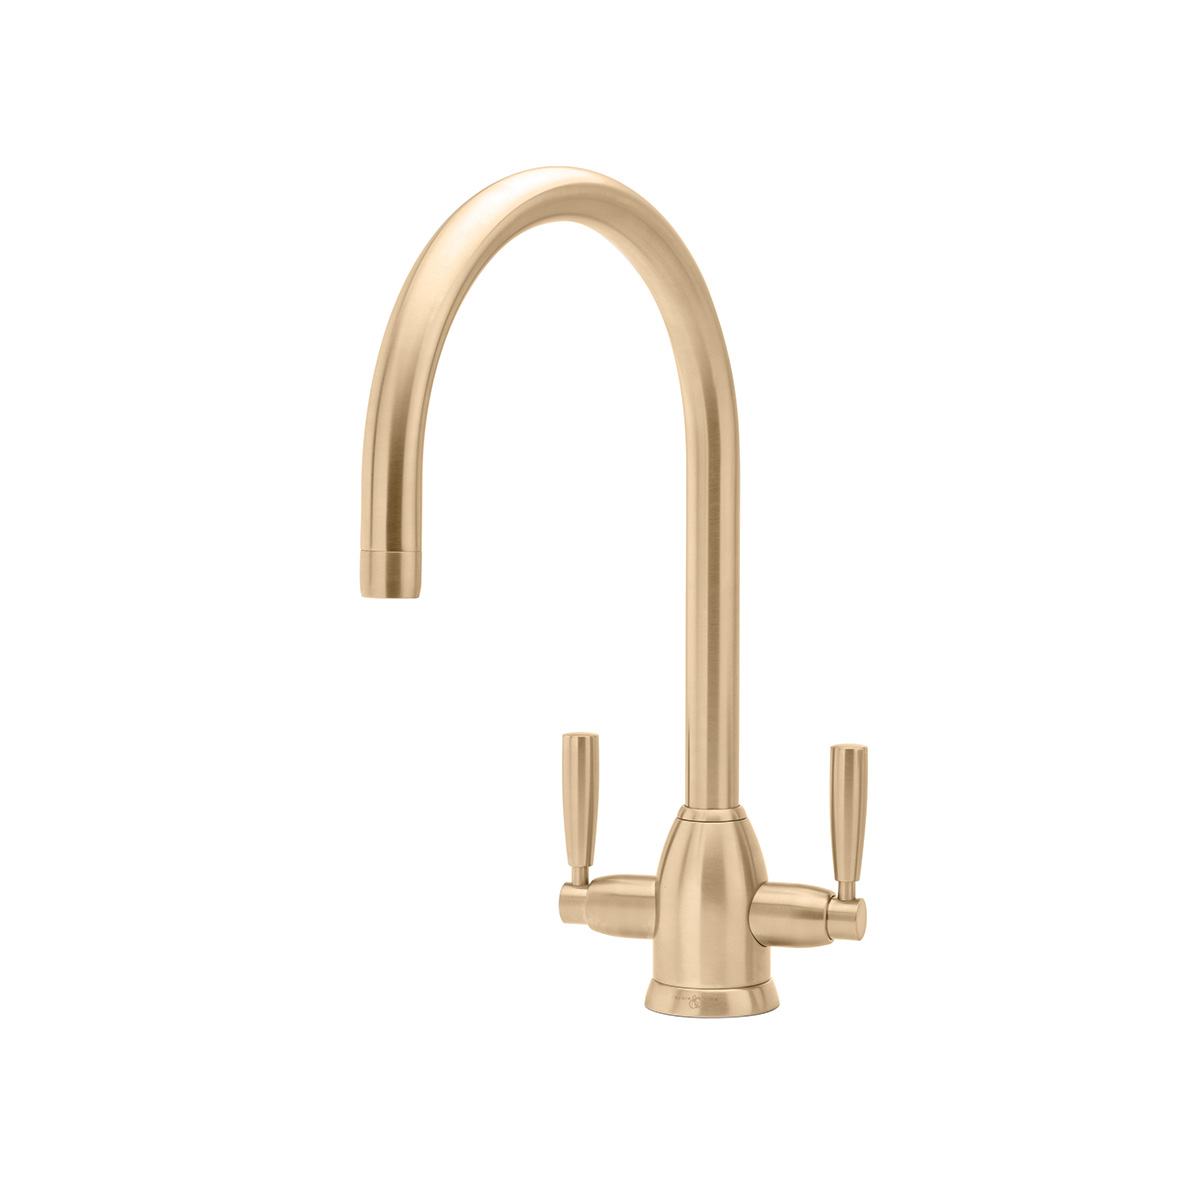 Shaws by Perrin & Rowe Silverdale kitchen mixer in Satin Brass. Oberon style kitchen mixer AUSH.4861. Distributed in Australia by Luxe by Design, Brisbane.